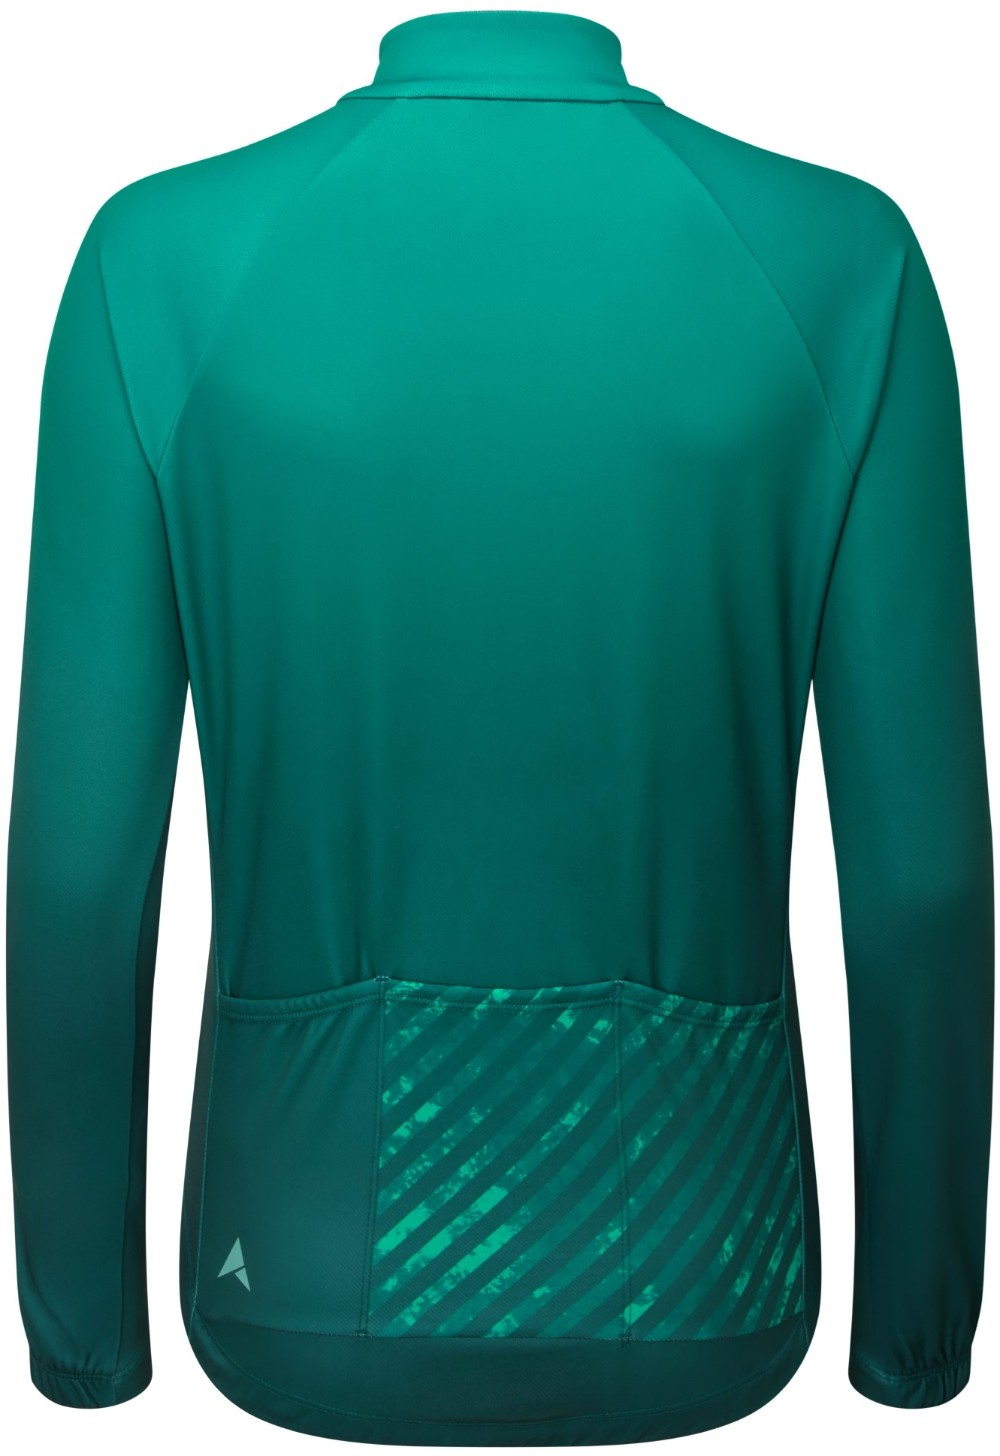 Airstream Womens Long Sleeve Jersey image 1